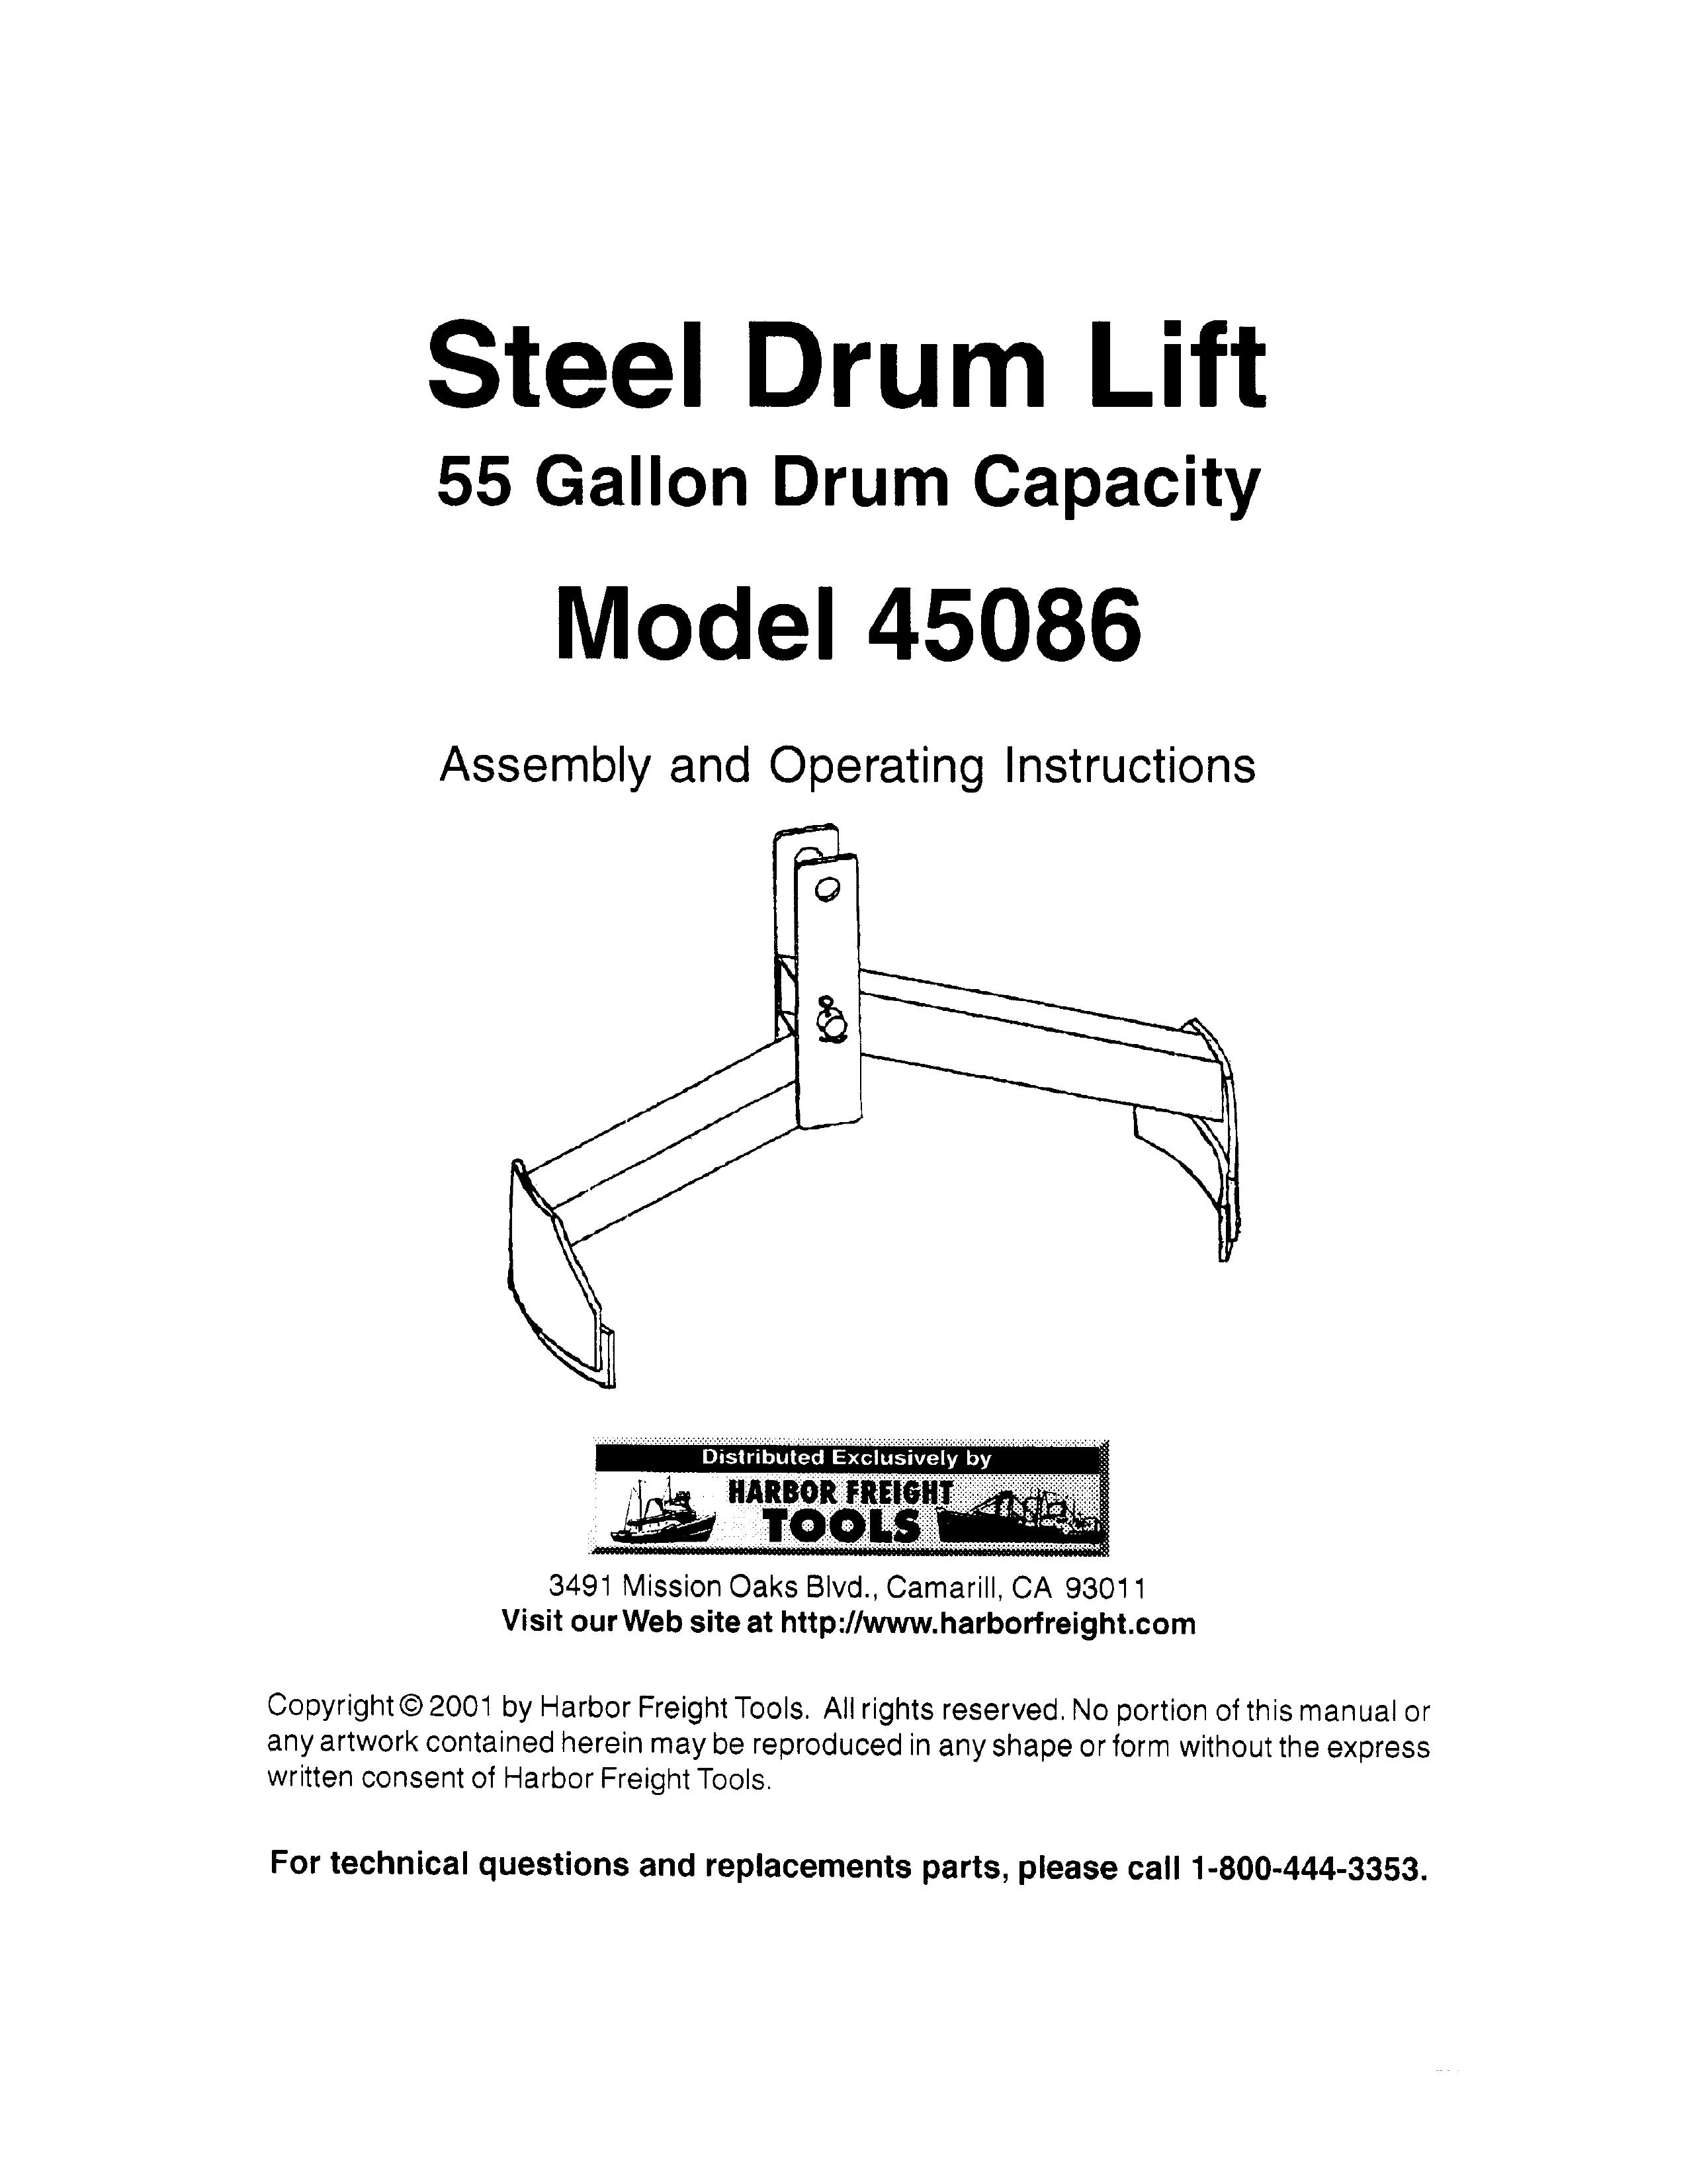 Harbor Freight Tools 45086 Drums User Manual